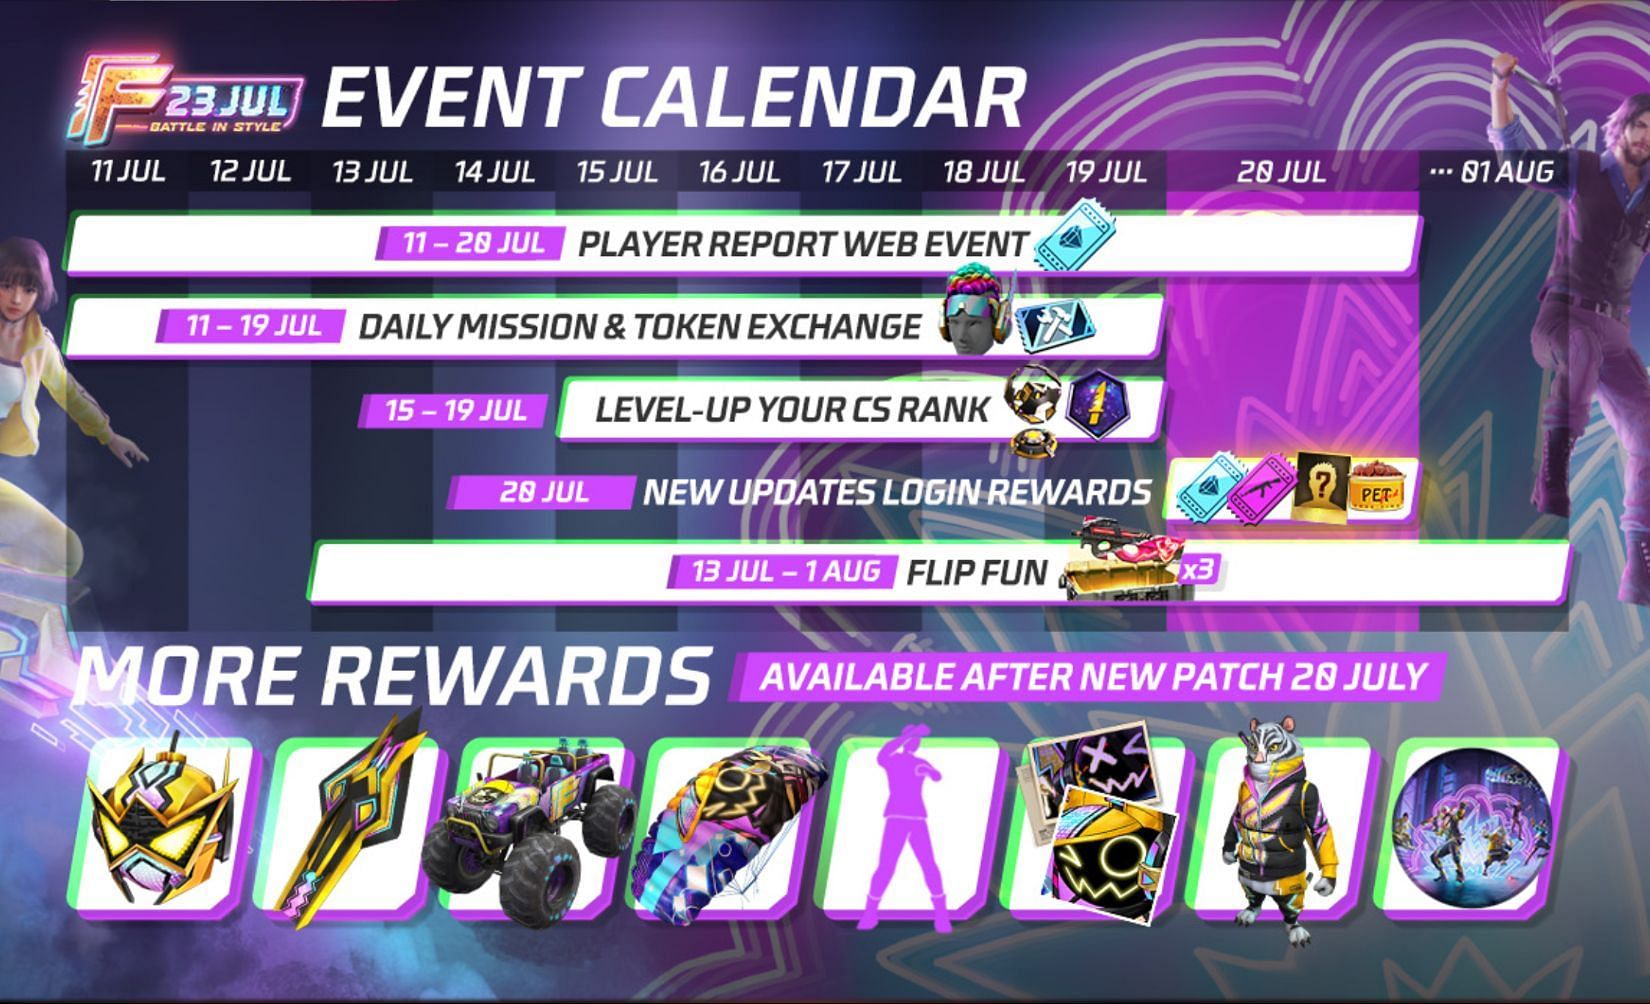 The Battle in Style calendar provides a list of the event (Image via Garena)